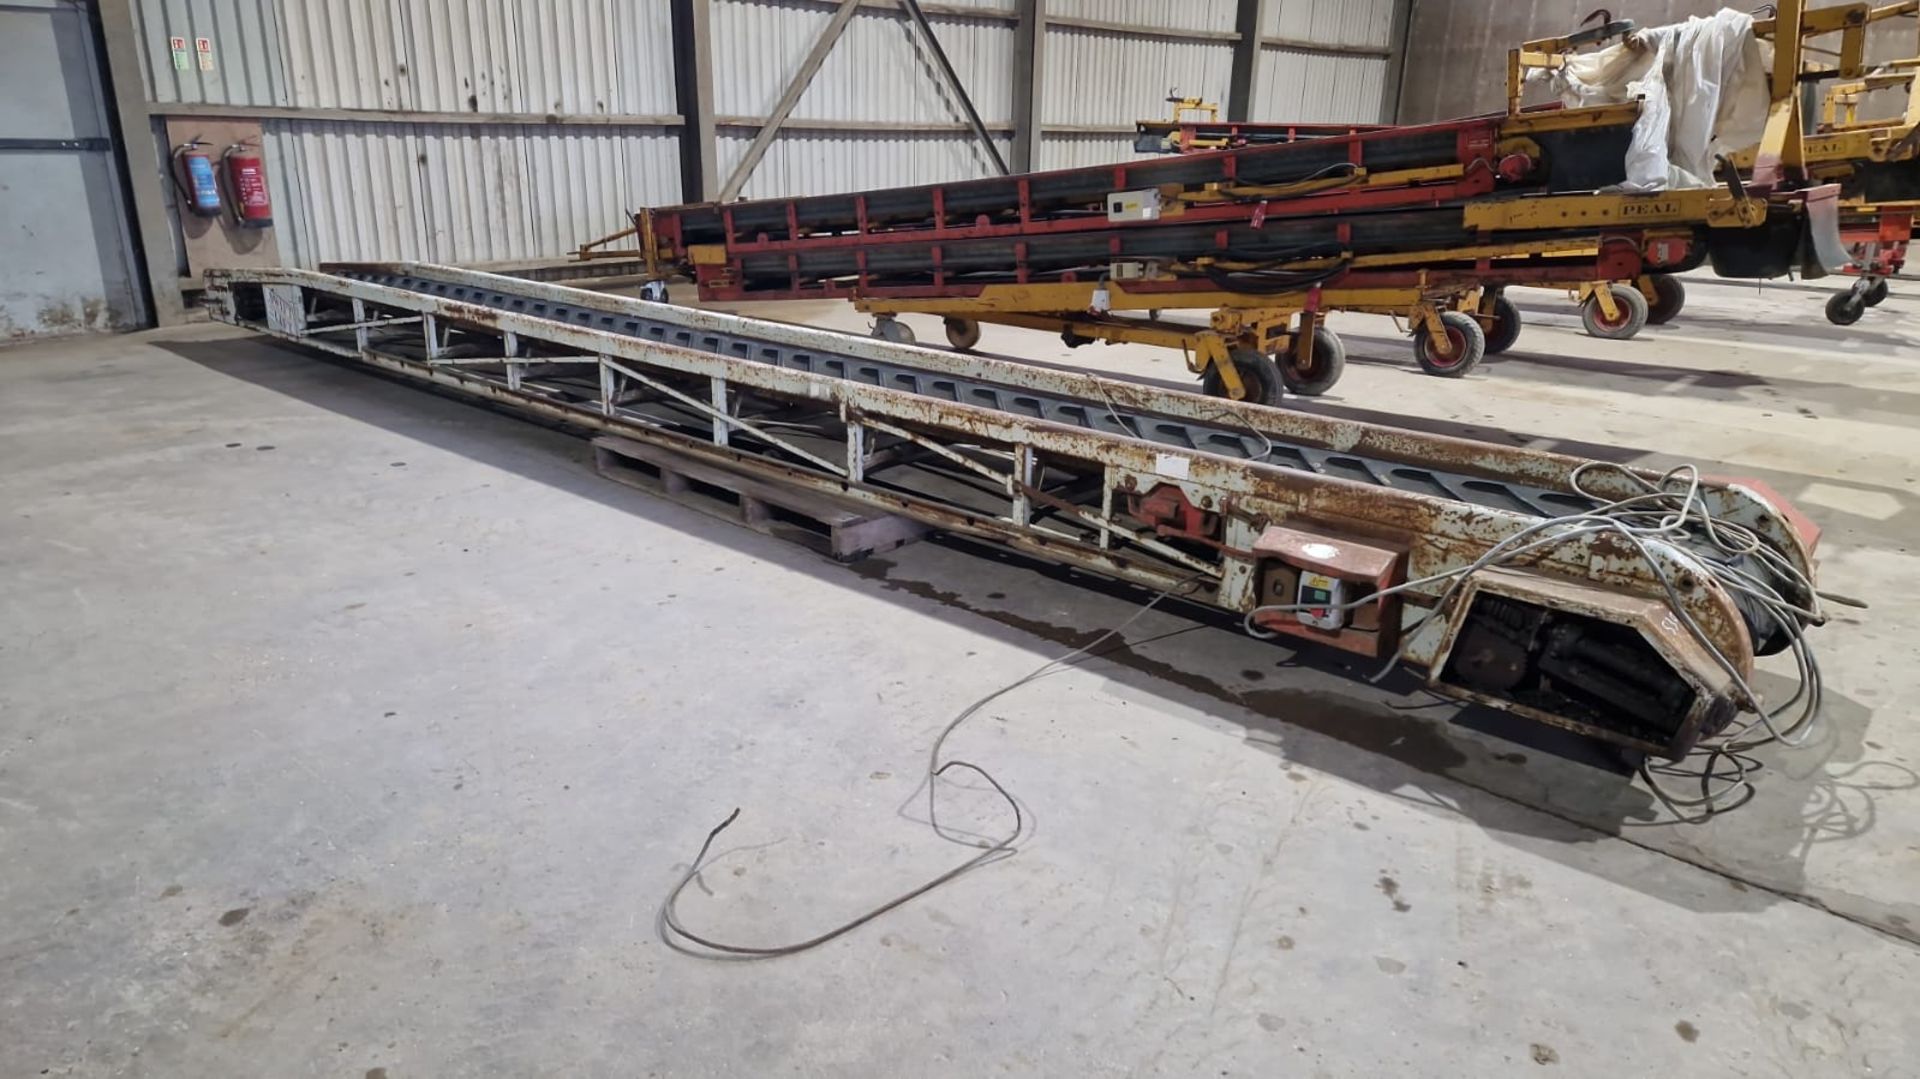 Swiftlift 3 phase elevator, cleated belt 8.5m long 600mm wide (not working), failed PAT test